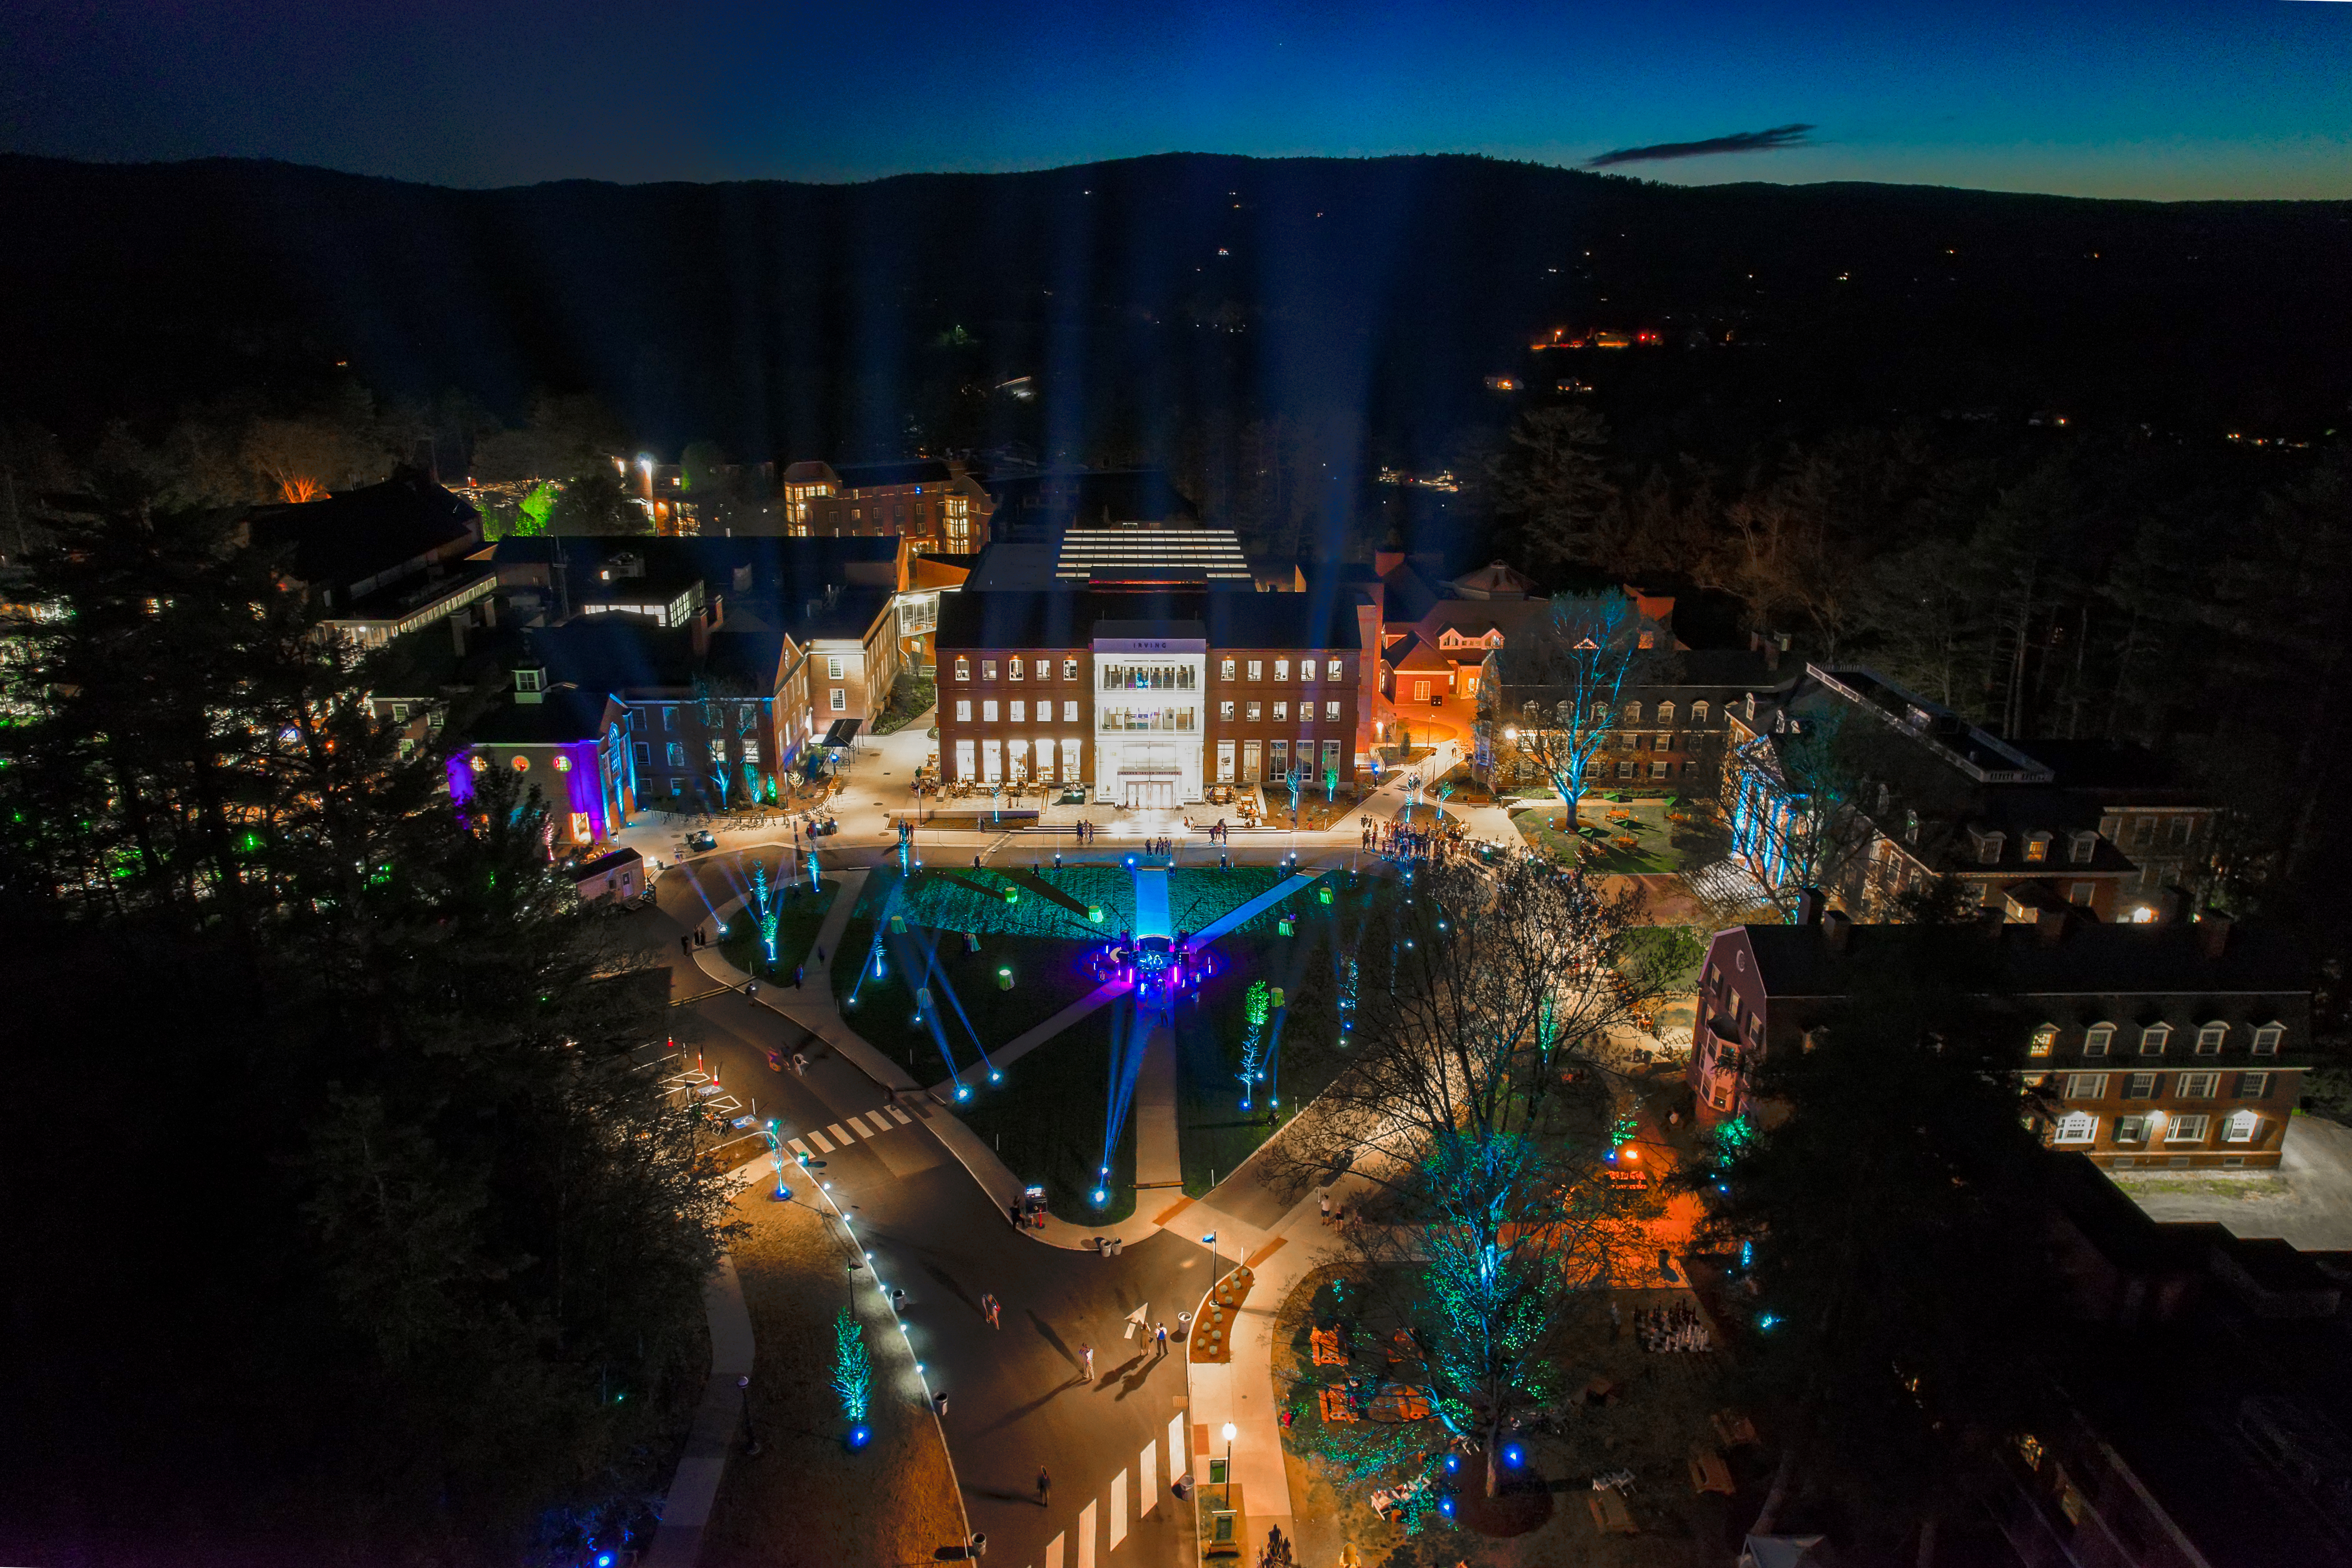 a birdseye view of the West End and Tuck mall lit up at night